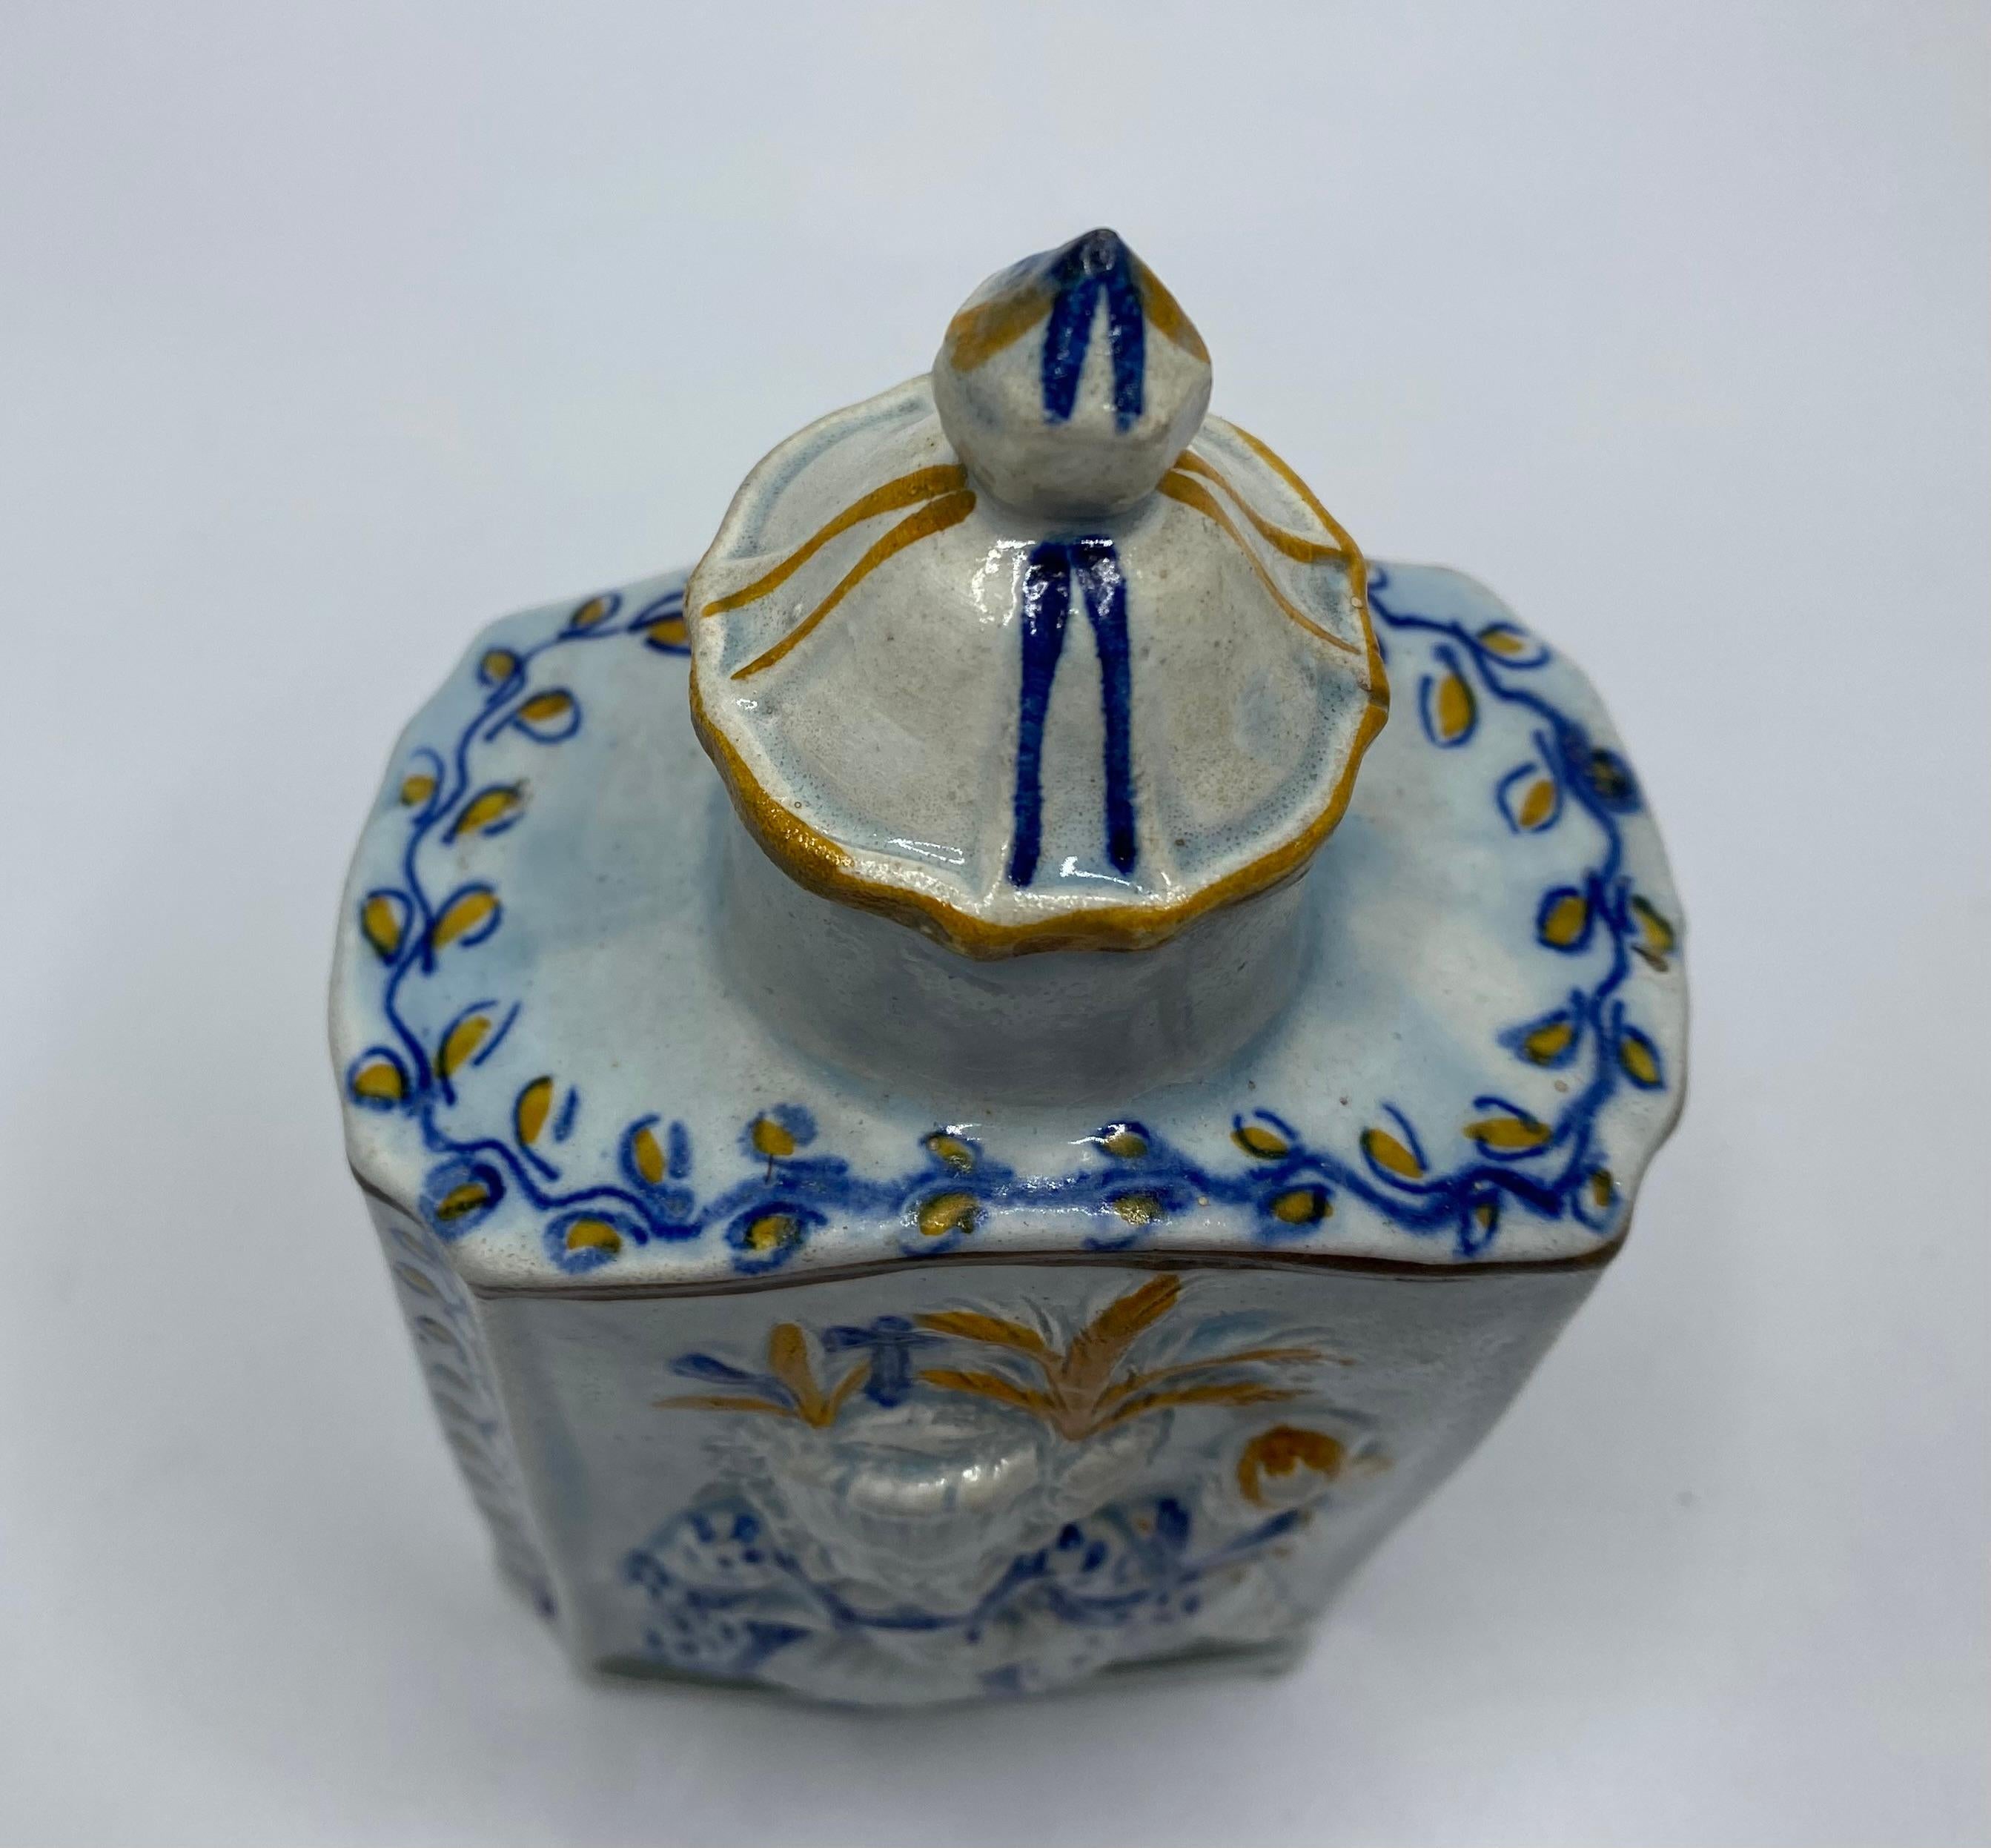 Early 19th Century Prattware pottery ‘Macaroni’ tea caddy and cover, c. 1800.